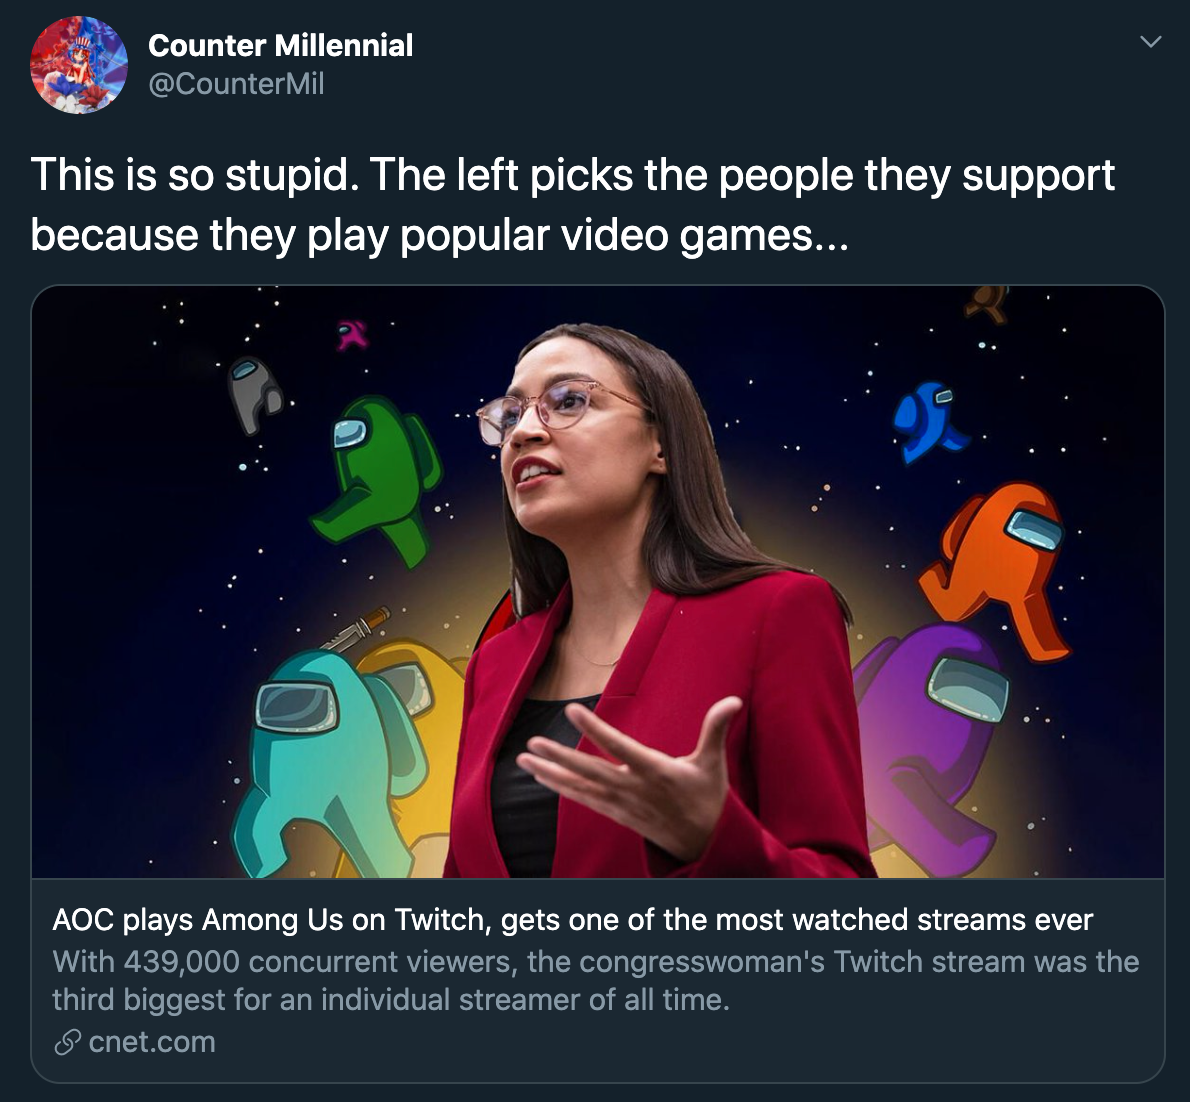 aoc among us twitch reactions -- This is so stupid. The left picks the people they support because they play popular video games... Aoc plays Among Us on Twitch, gets one of the most watched streams ever With 439,000 concurrent viewers, the congresswoman